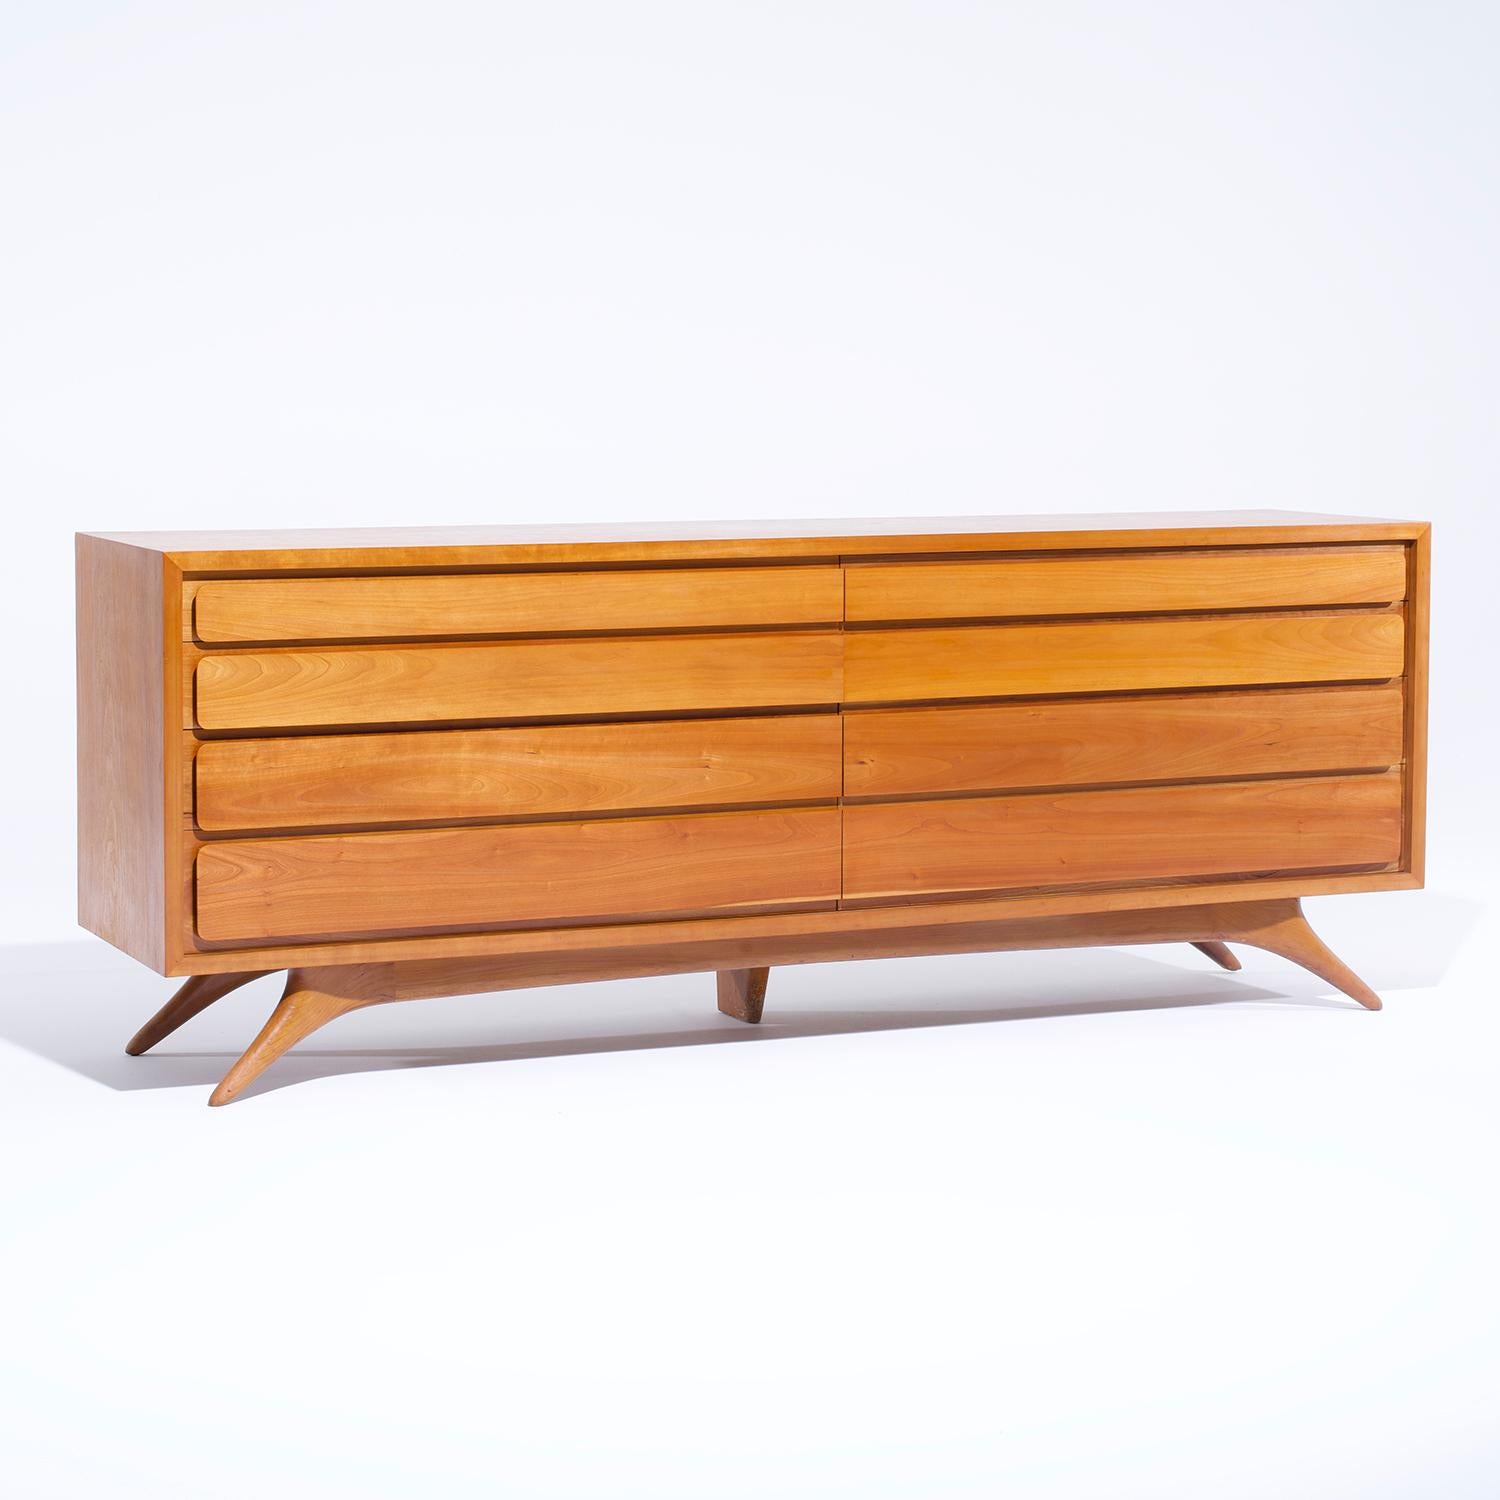 A rectangular, vintage Mid-Century modern American dresser made of hand crafted bleached Mahogany designed by Vladimir Kagan, in good condition. The partly polished sideboard is composed with eight large drawers. The interior consists of many